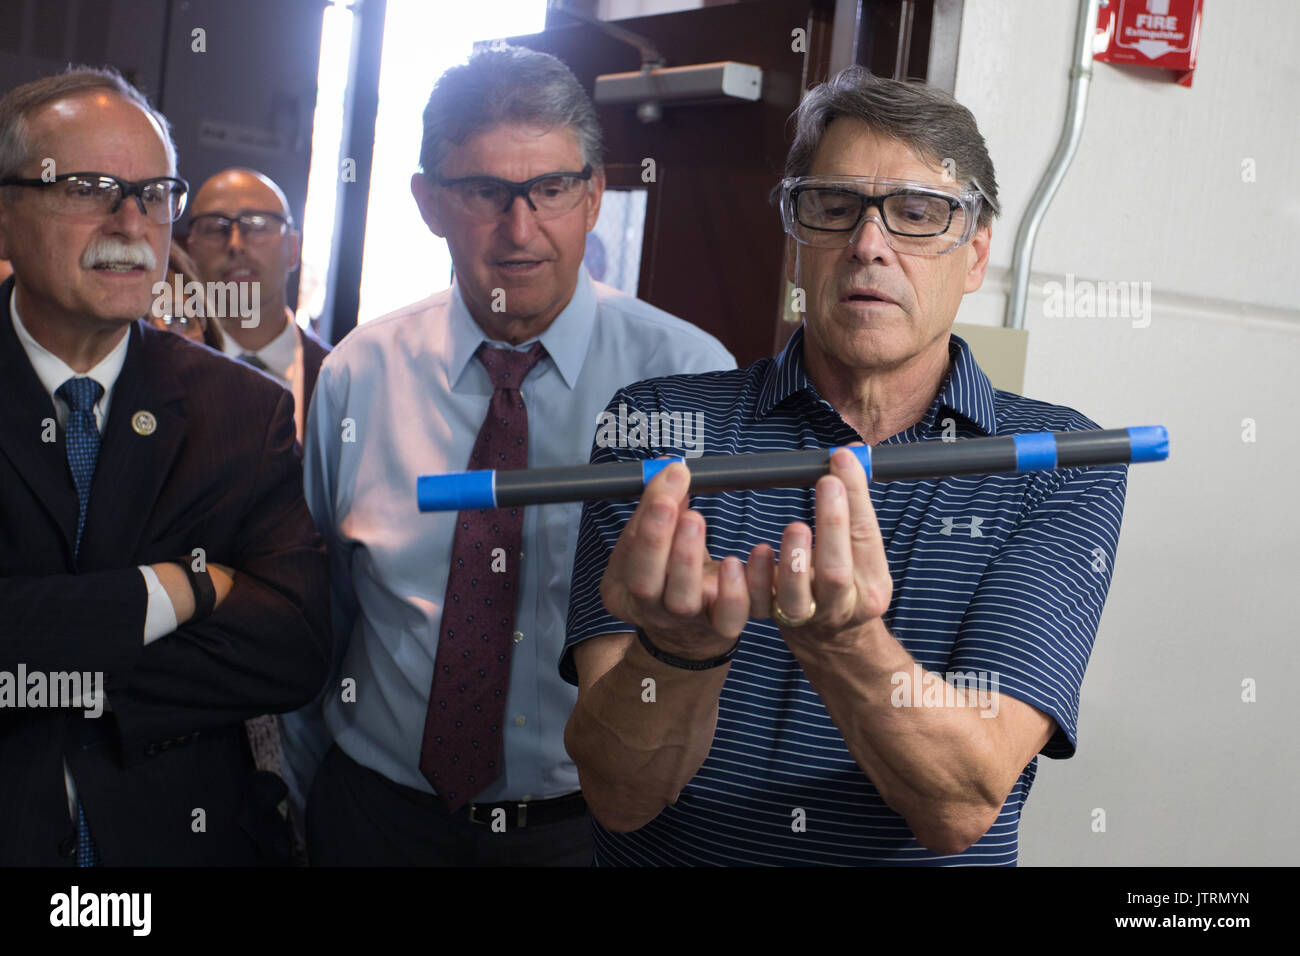 U.S. Secretary of Energy Rick Perry, right, and Senator Joe Manchin, center, during a tour of the National Energy Technology Laboratory July 6, 2017 in Pittsburgh, Pennsylvania. Stock Photo